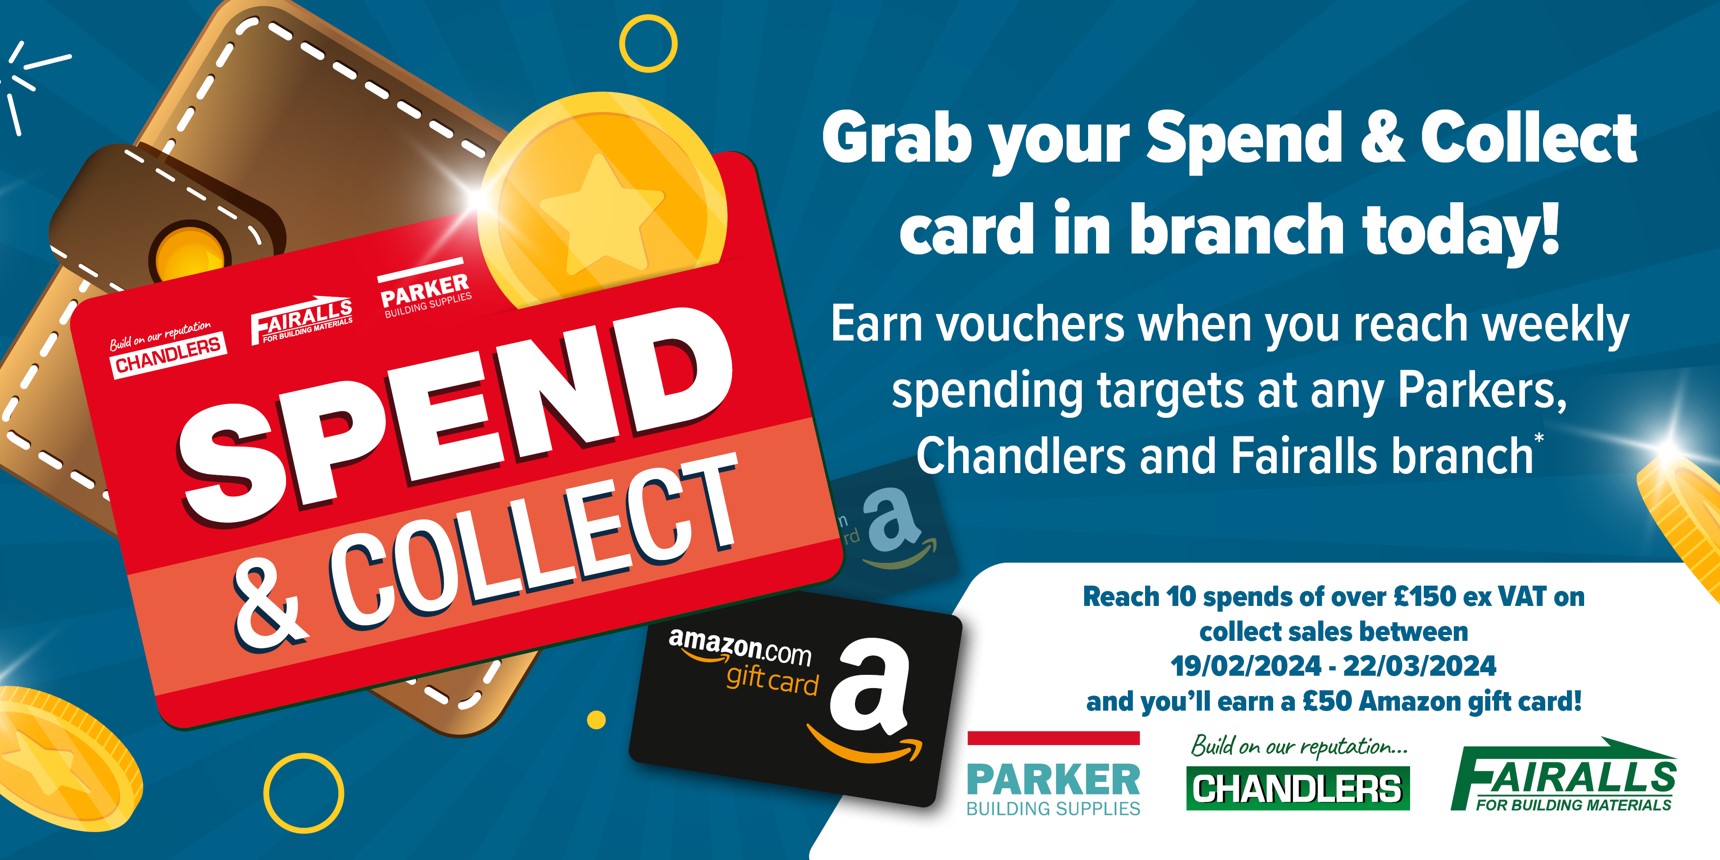 Spend & Collect to Earn a £50 Amazon Gift Card